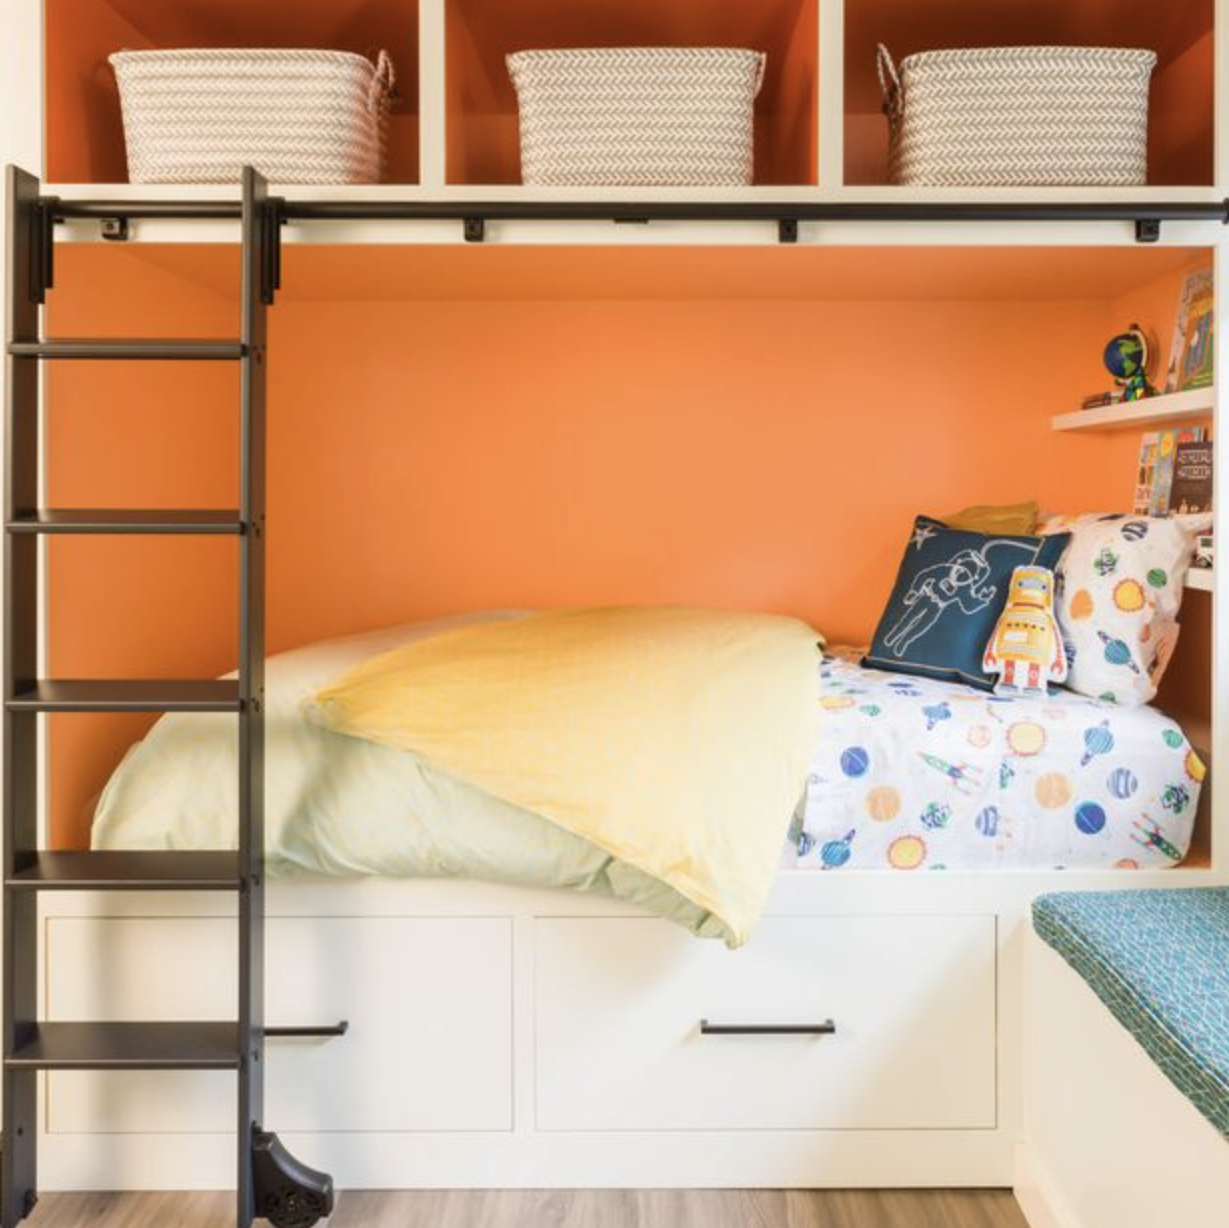 21 of the Absolute Best Paint Colors for Kids Rooms